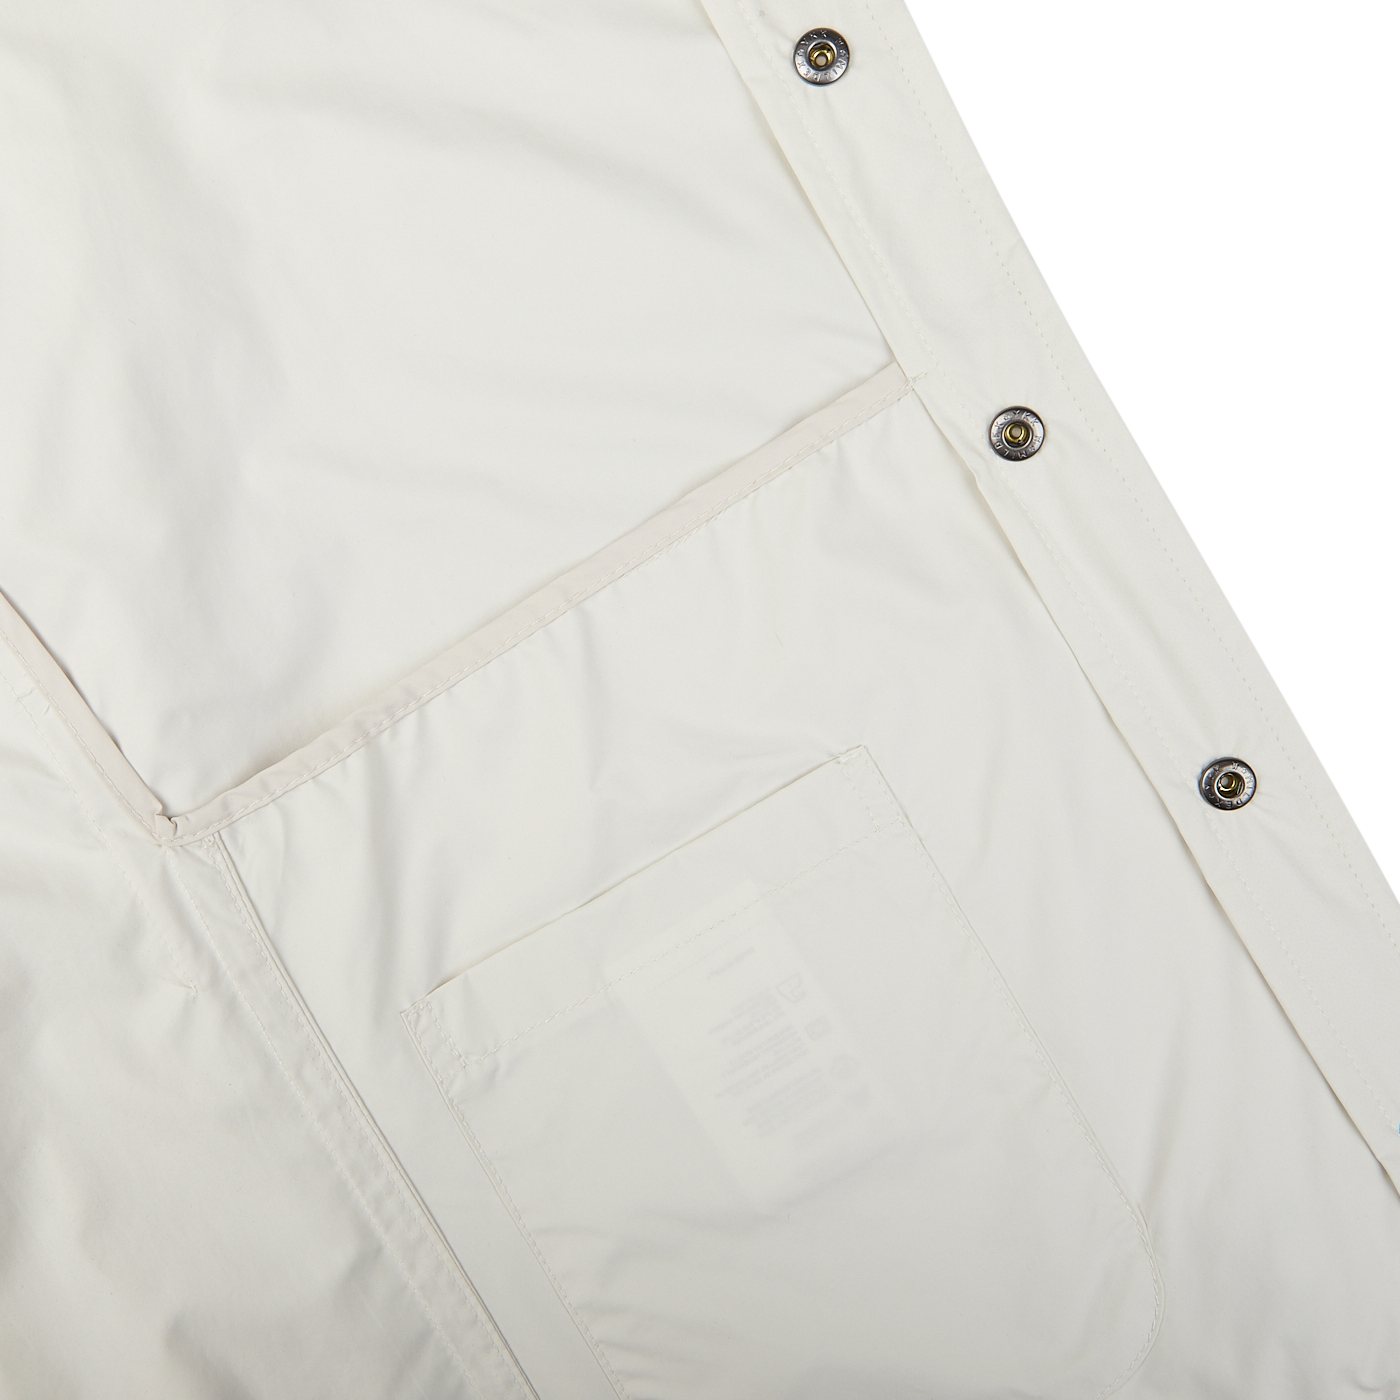 Water-resistant Off-White nylon fabric with snap buttons and a transparent pocket detail by Mazzarelli.